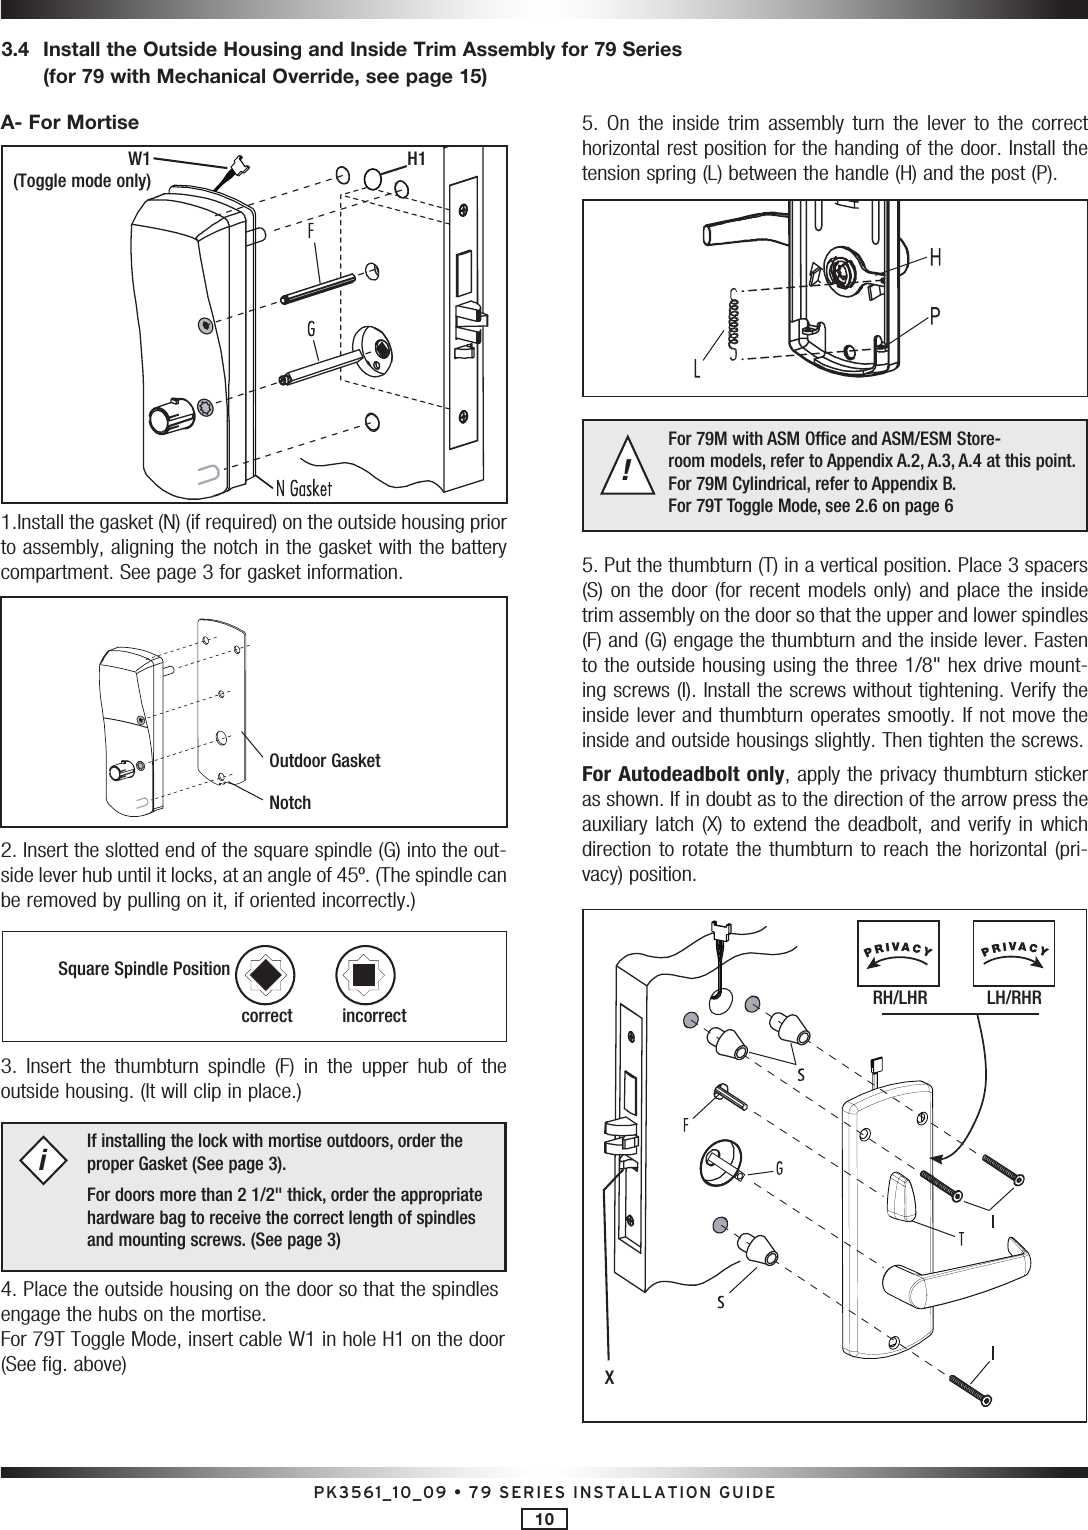 PK3561_10_09 • 79 SERIES INSTALLATION GUIDE103.4   Install the Outside Housing and Inside Trim Assembly for 79 Series (for 79 with Mechanical Override, see page 15)A- For Mortise1.Install the gasket (N) (if required) on the outside housing prior to assembly, aligning the notch in the gasket with the battery compartment. See page 3 for gasket information.2. Insert the slotted end of the square spindle (G) into the out-side lever hub until it locks, at an angle of 45º. (The spindle can be removed by pulling on it, if oriented incorrectly.)3.  Insert  the  thumbturn  spindle  (F)  in  the  upper  hub  of  the outside housing. (It will clip in place.) If installing the lock with mortise outdoors, order the proper Gasket (See page 3). For doors more than 2 1/2&quot; thick, order the appropriate hardware bag to receive the correct length of spindles and mounting screws. (See page 3)i4. Place the outside housing on the door so that the spindles engage the hubs on the mortise. For 79T Toggle Mode, insert cable W1 in hole H1 on the door (See fig. above)5.  On  the  inside  trim  assembly  turn  the  lever  to  the  correct horizontal rest position for the handing of the door. Install the tension spring (L) between the handle (H) and the post (P).For 79M with ASM Office and ASM/ESM Store- room models, refer to Appendix A.2, A.3, A.4 at this point.  For 79M Cylindrical, refer to Appendix B. For 79T Toggle Mode, see 2.6 on page 6!5. Put the thumbturn (T) in a vertical position. Place 3 spacers (S) on the door (for  recent models only) and  place the inside trim assembly on the door so that the upper and lower spindles (F) and (G) engage the thumbturn and the inside lever. Fasten to the outside housing using the three 1/8&quot; hex drive mount-ing screws (I   ). Install the screws without tightening. Verify the inside lever and thumbturn operates smootly. If not move the inside and outside housings slightly. Then tighten the screws.For Autodeadbolt only, apply the privacy thumbturn sticker as shown. If in doubt as to the direction of the arrow press the auxiliary latch  (X) to extend the deadbolt,  and verify in which direction to rotate the thumbturn to reach the horizontal (pri-vacy) position.Outdoor GasketNotchSquare Spindle Positioncorrect       incorrectH1W1 (Toggle mode only)RH/LHR            LH/RHRX